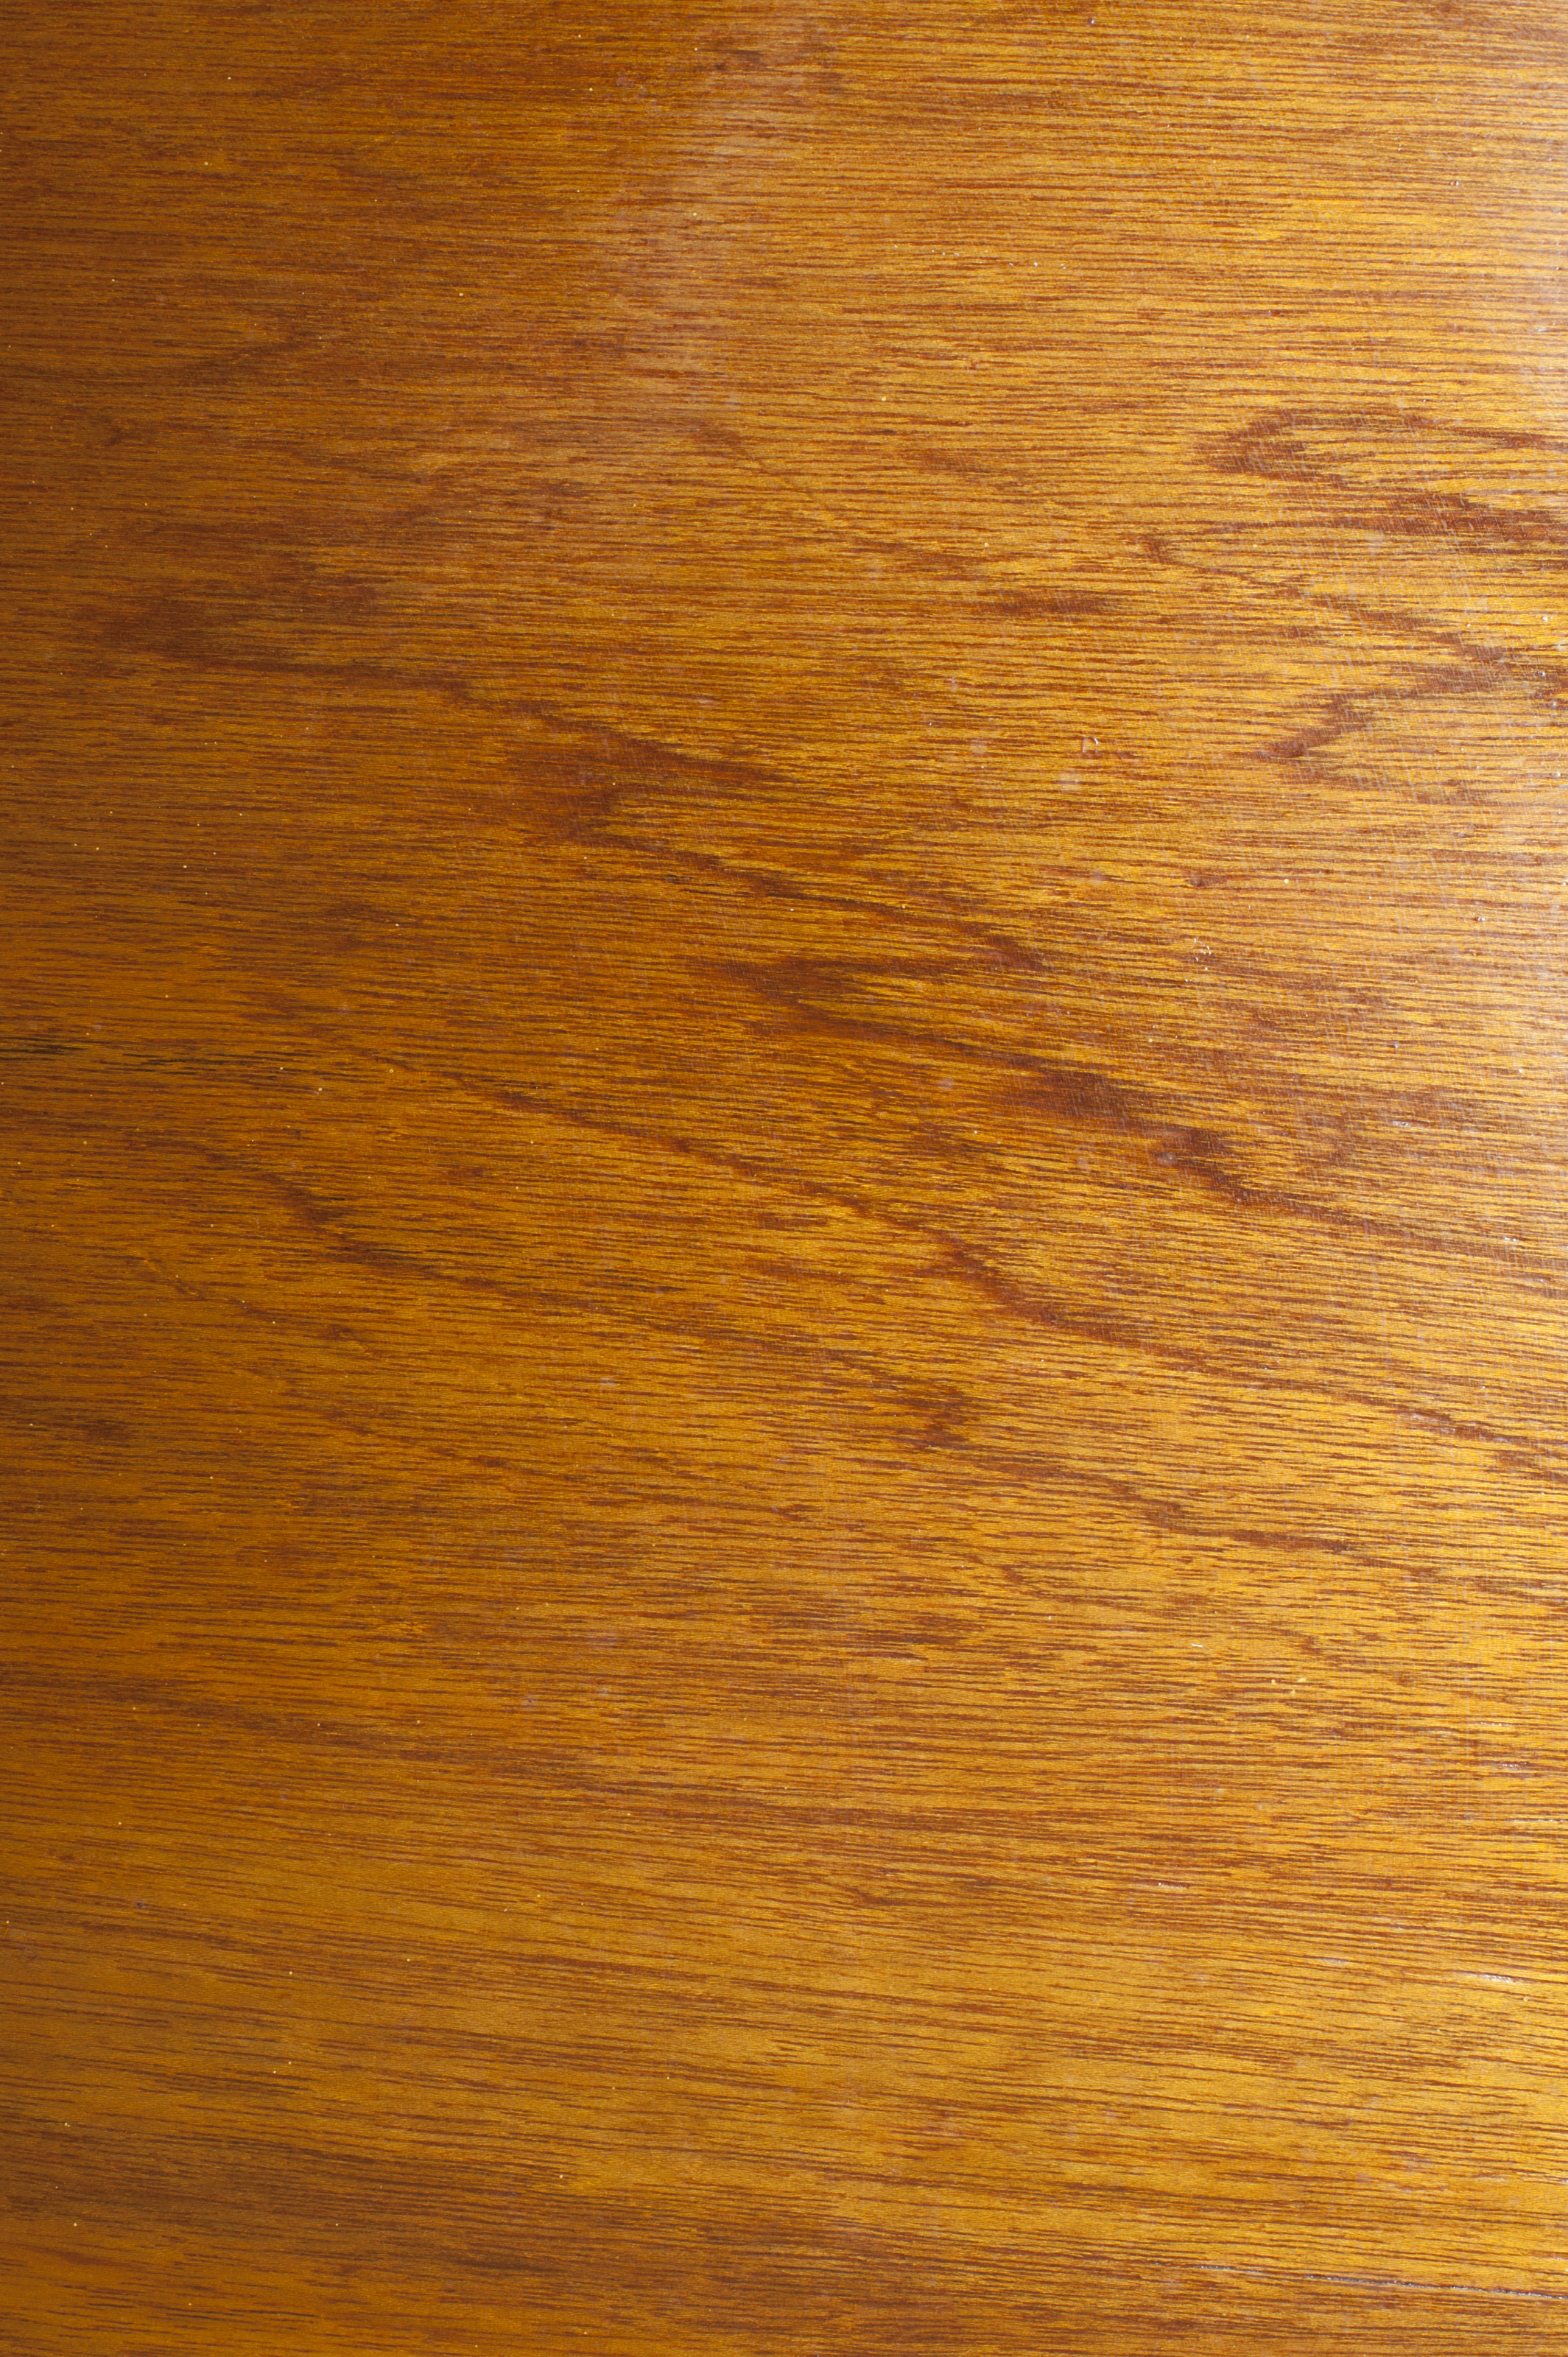 wood grain background-7877 | Stockarch Free Stock Photo Archive